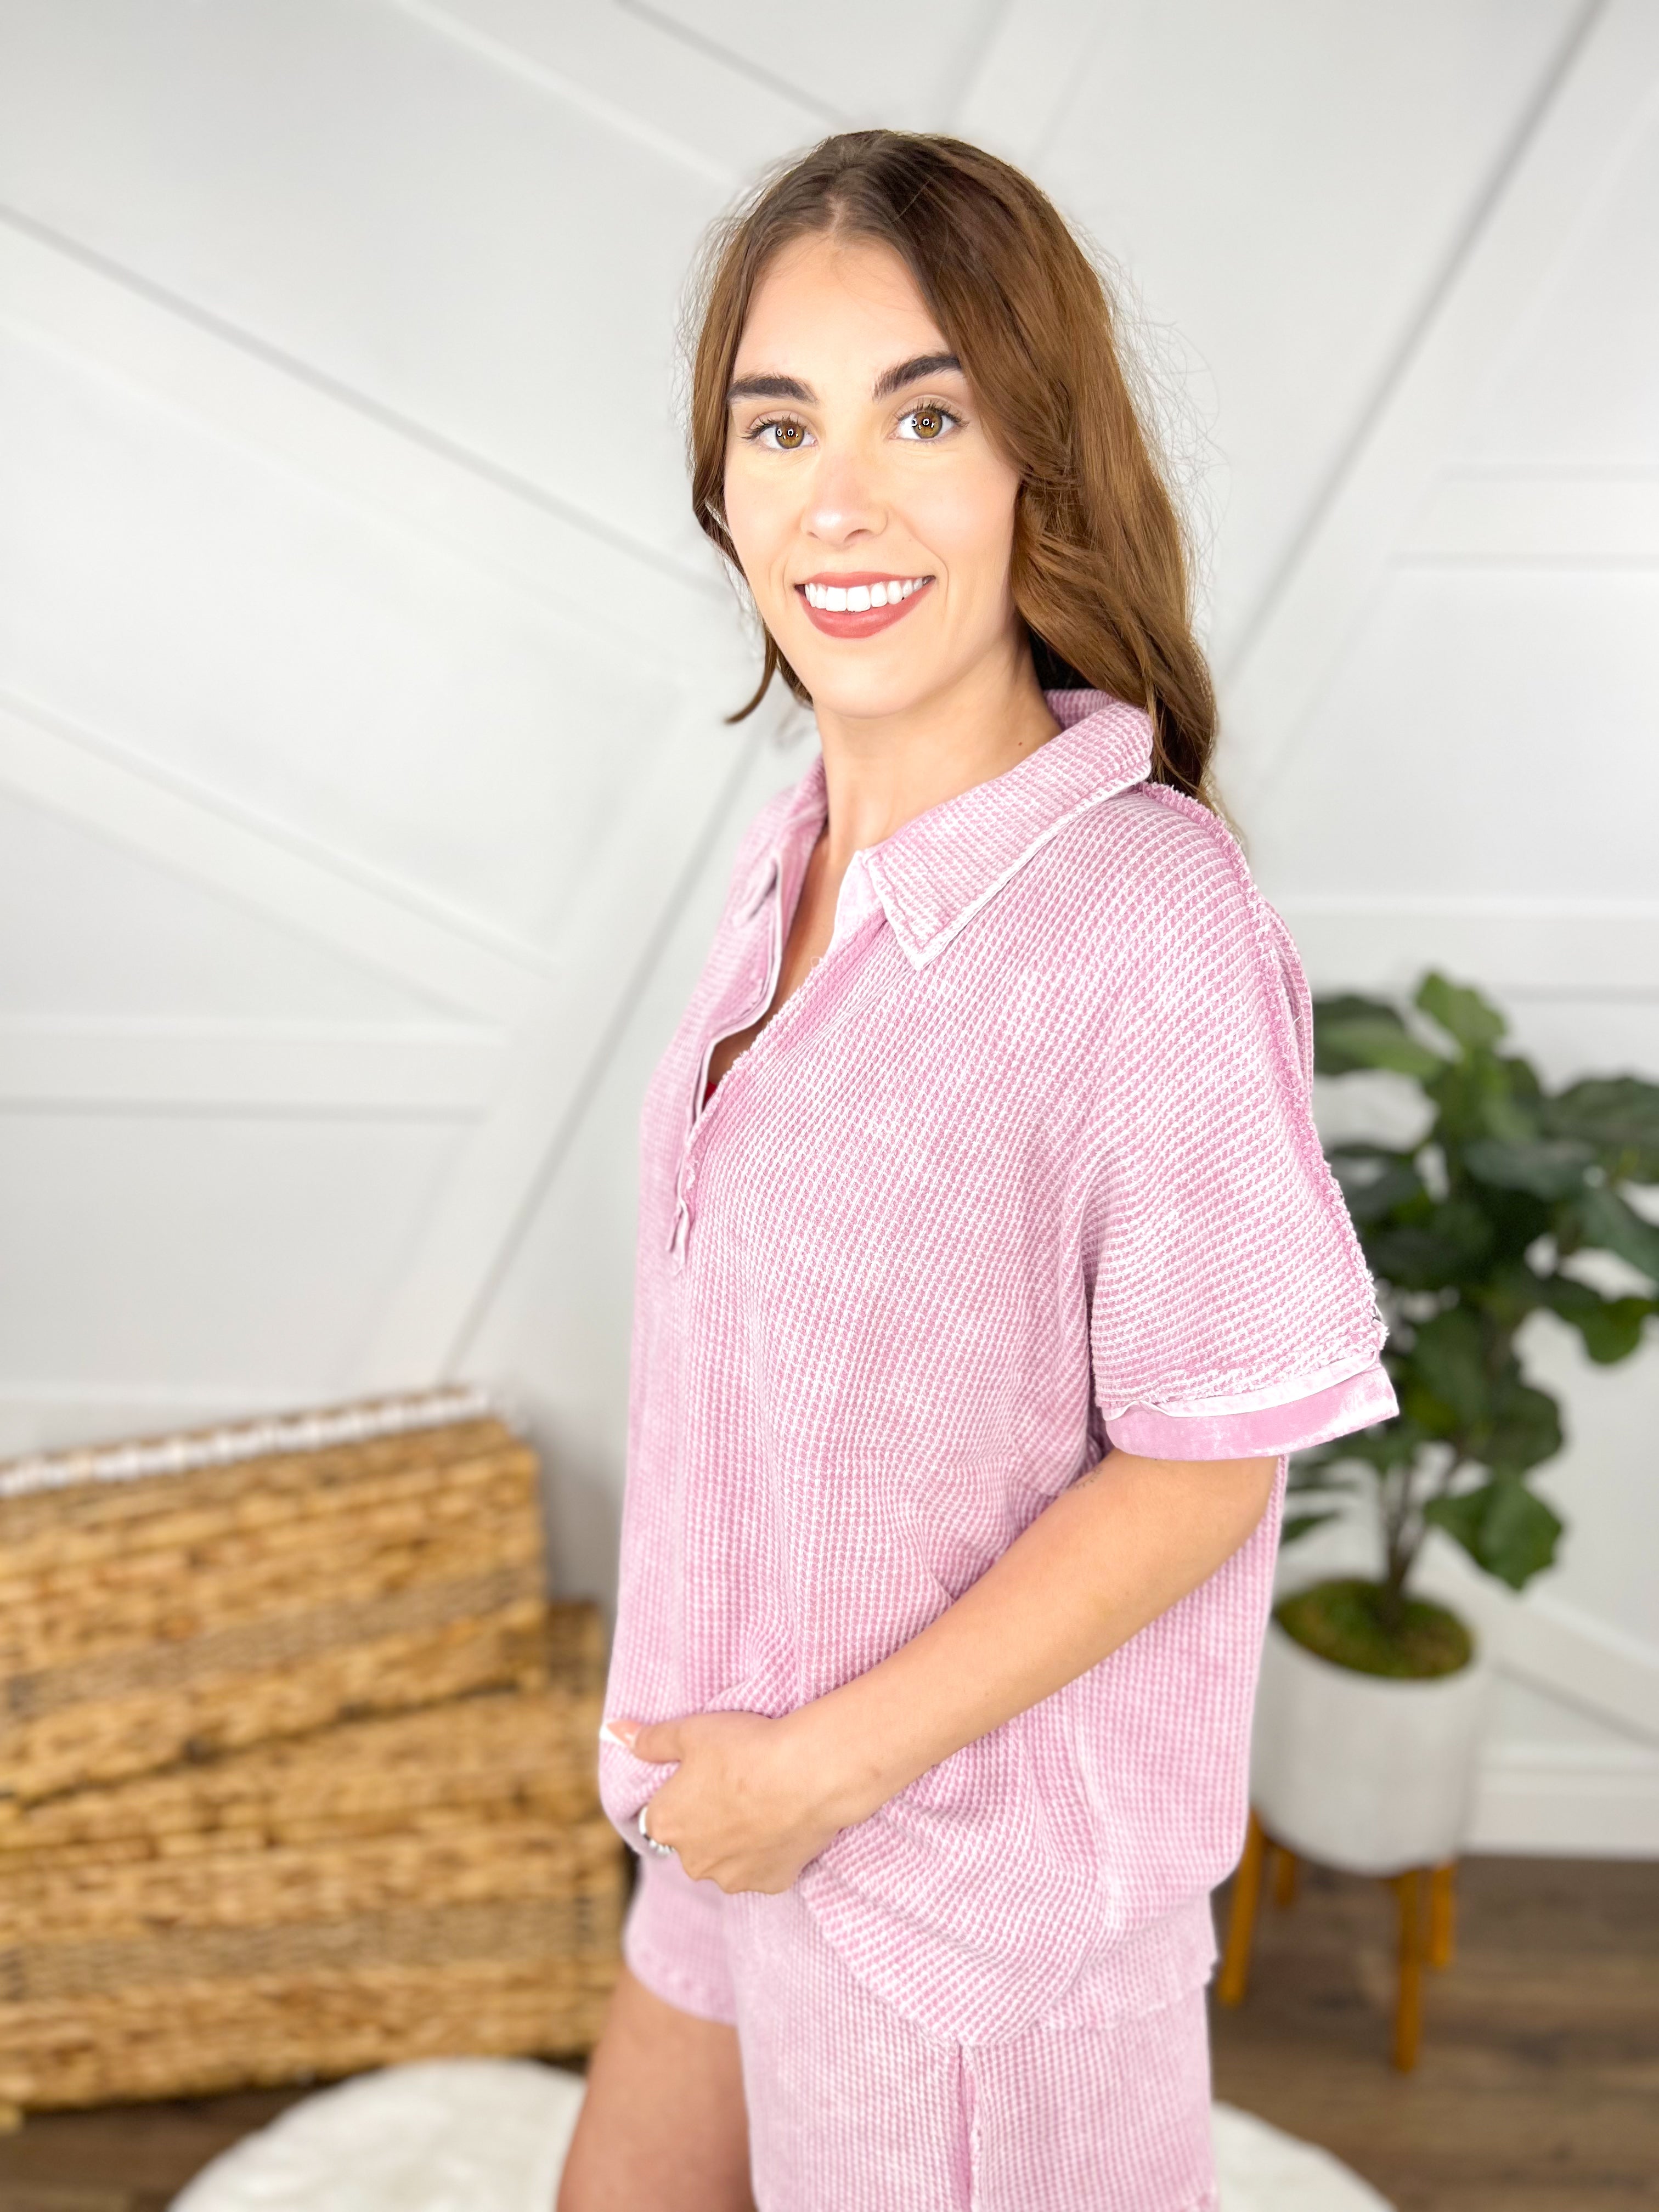 Add Some Edge Top-110 Short Sleeve Top-White Birch-Heathered Boho Boutique, Women's Fashion and Accessories in Palmetto, FL